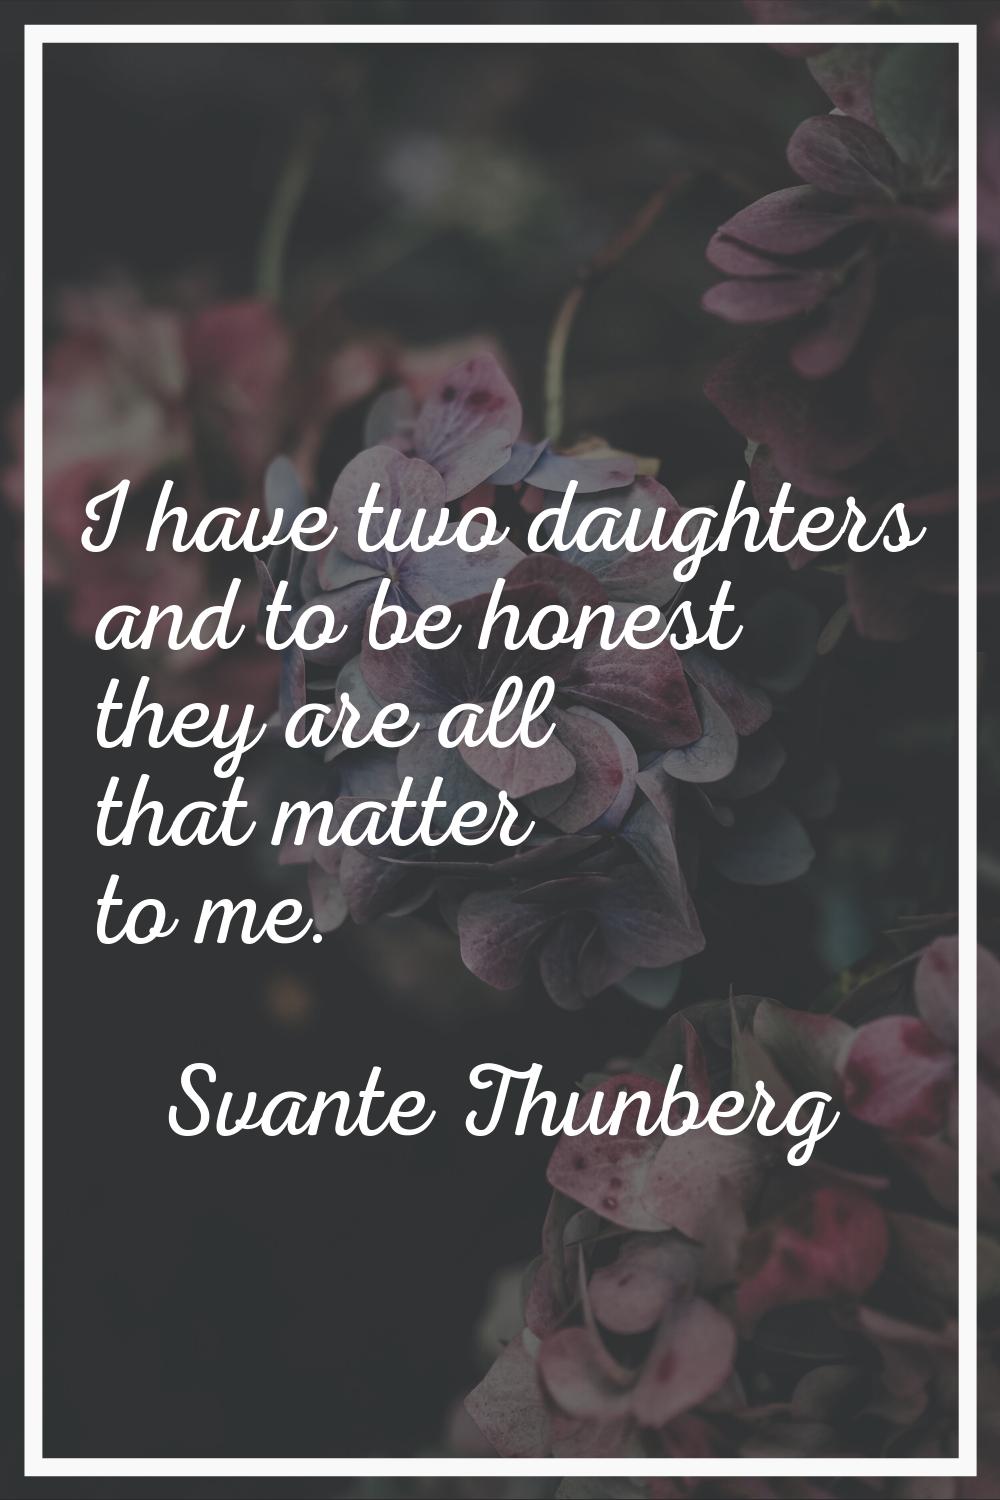 I have two daughters and to be honest they are all that matter to me.